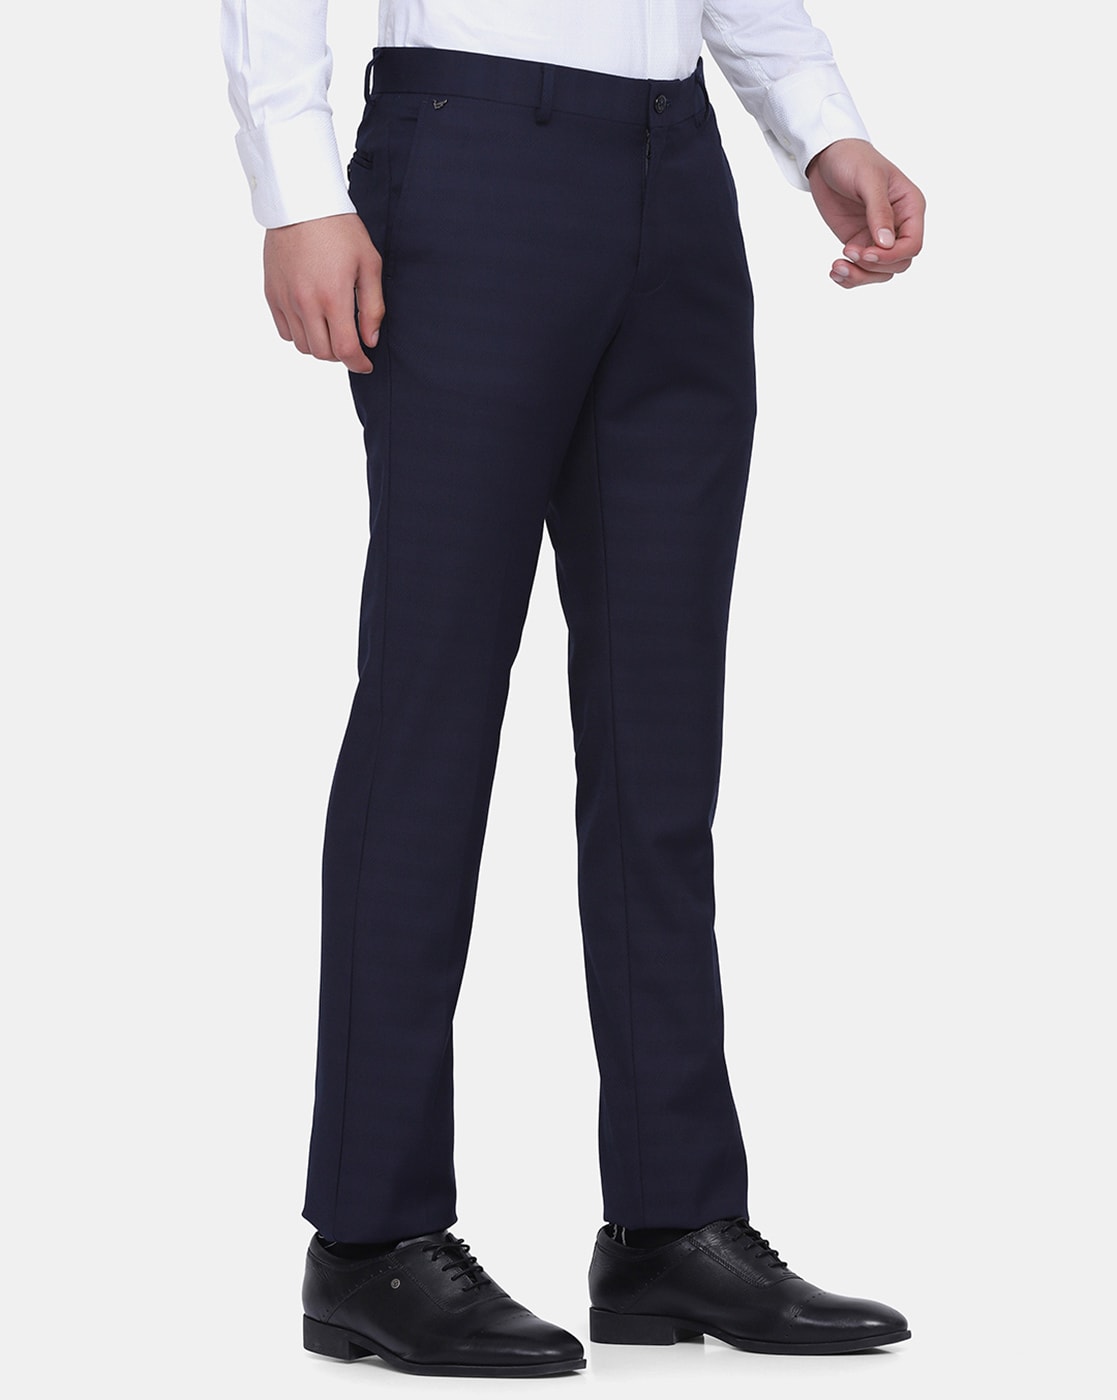 Buy blackberrys Men's Formal B-95 Slim Fit Stretchable Trousers Black at  Amazon.in